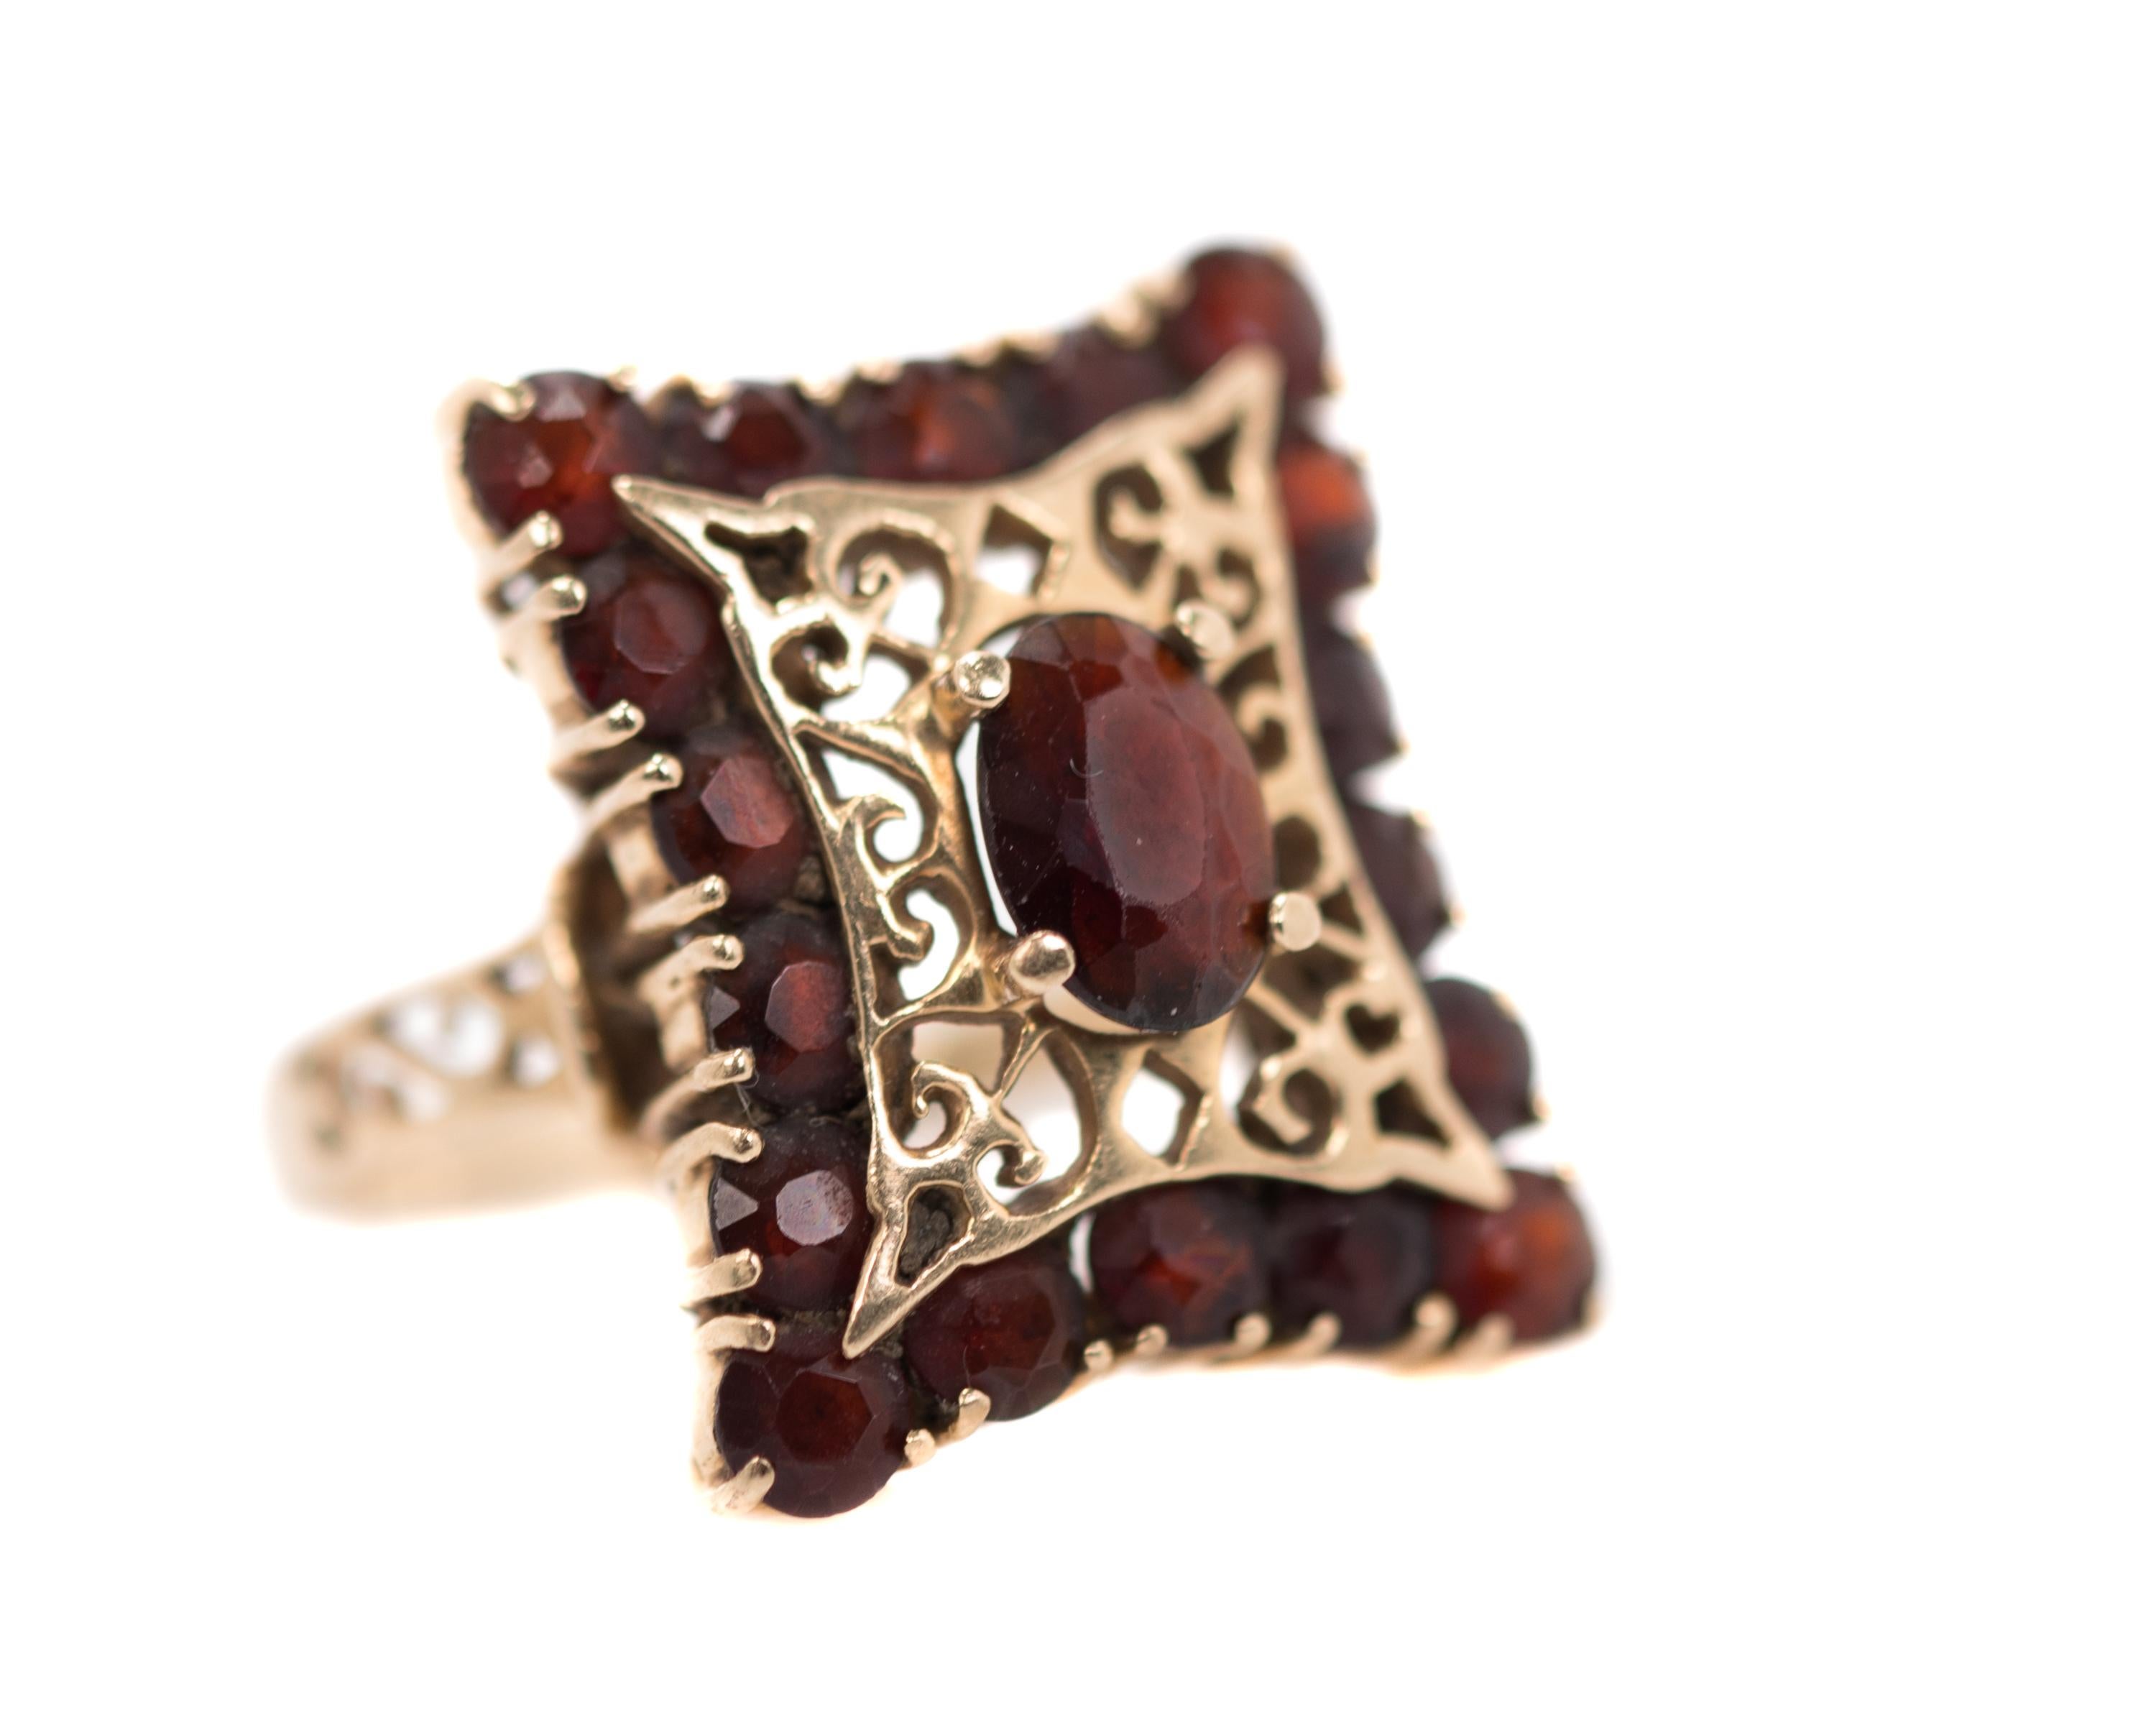 1971 Garnet Ring - 14 Karat Yellow Gold, Garnets

Features:
Originally purchased in South Africa
2.0 carats Garnets
Oval, faceted, 4-prong set Center Stone
16 stone halo
14 Karat Yellow Gold Setting
Decorative, Open Gallery
Filigree on face and